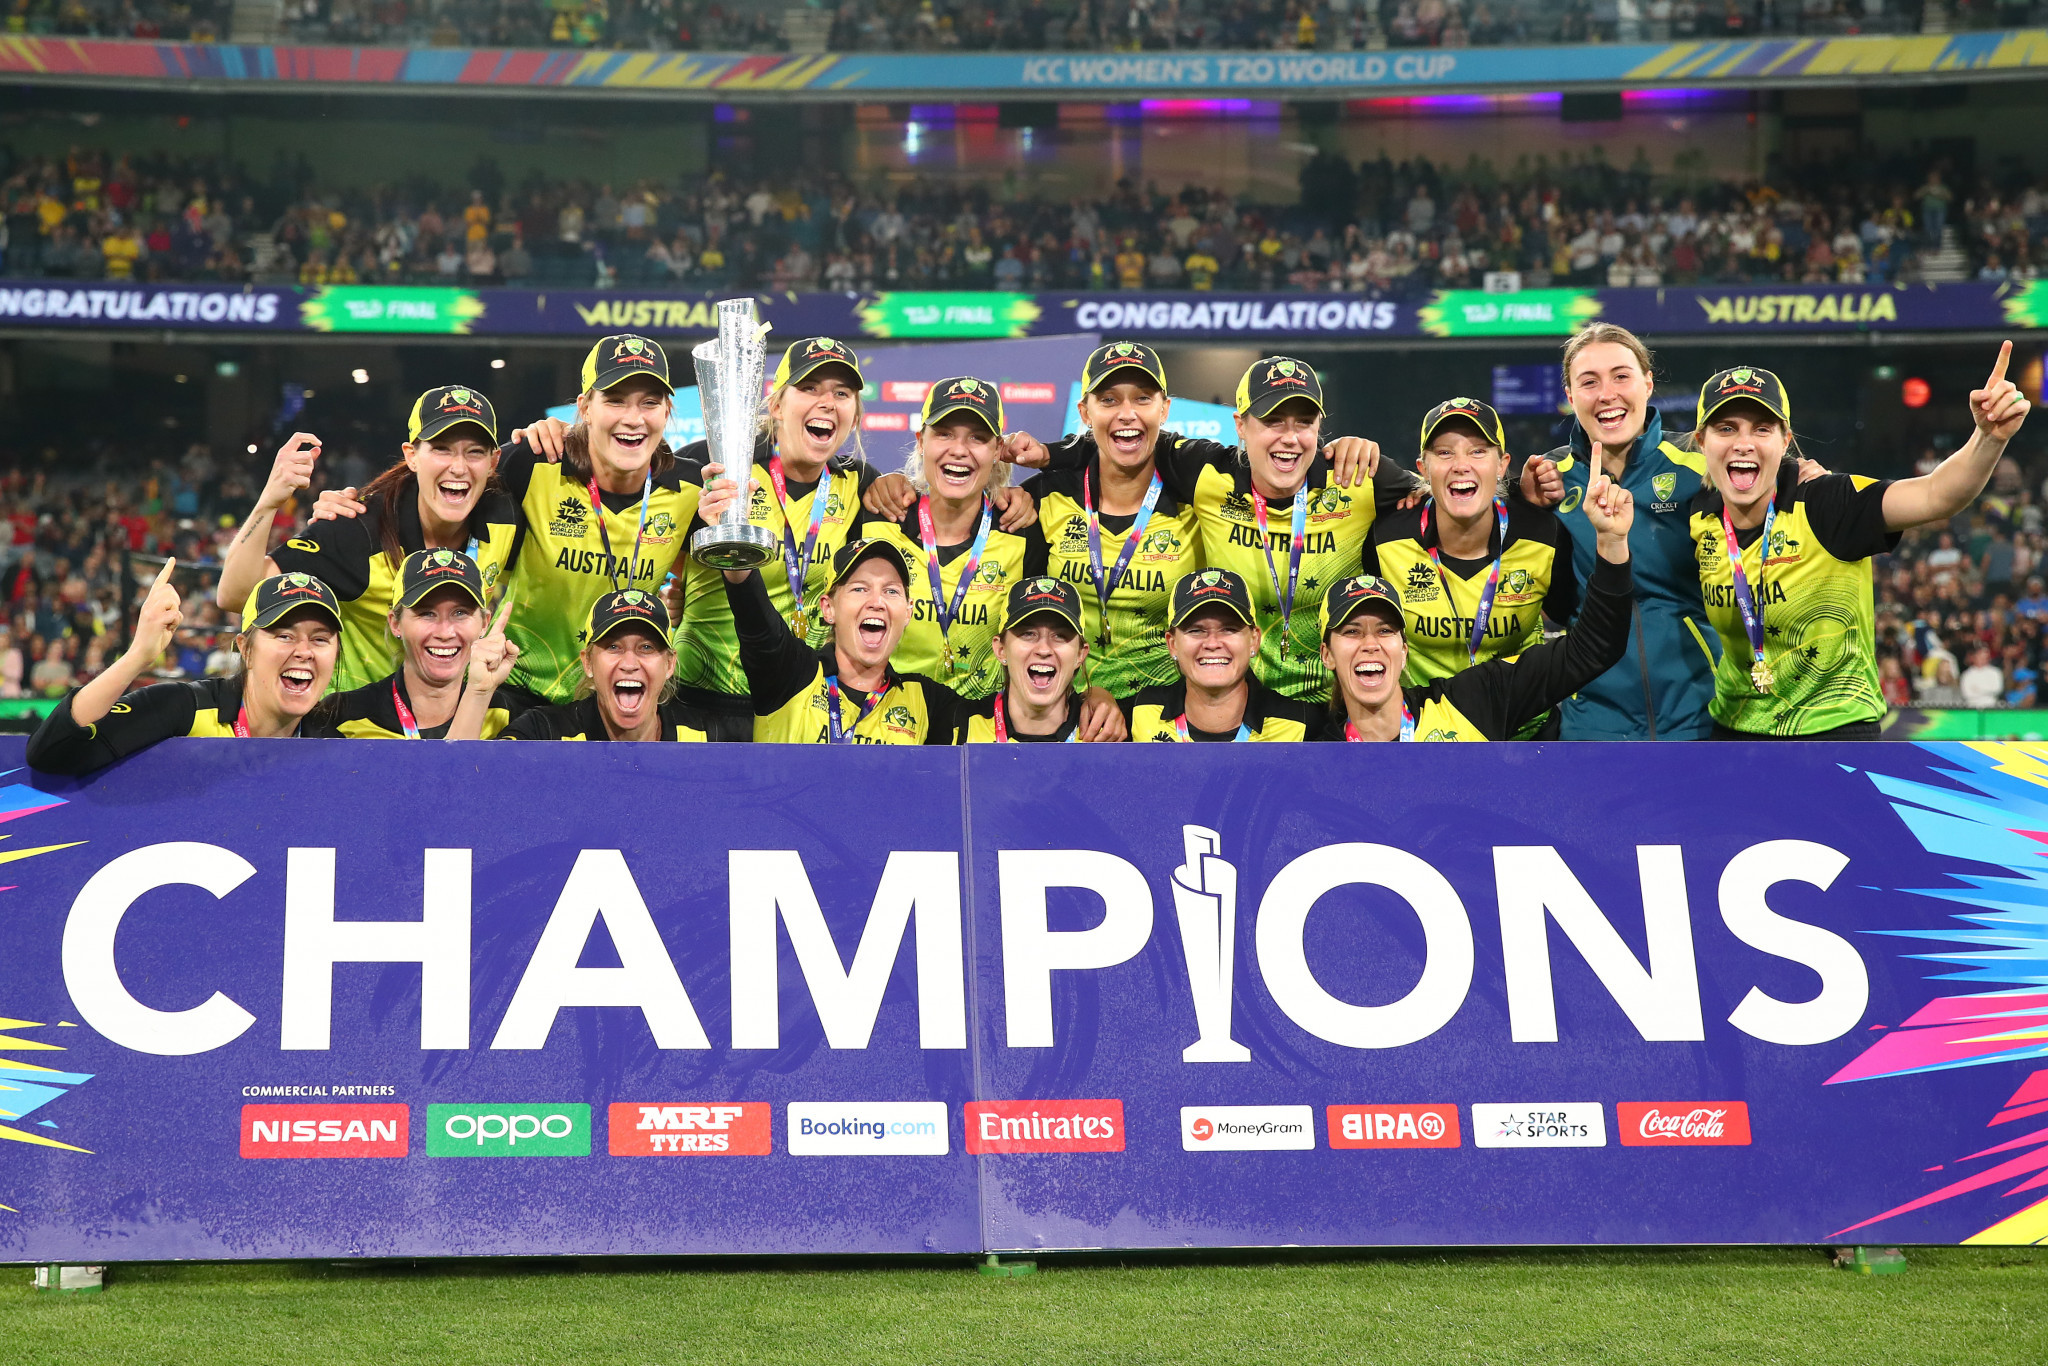 Australia won the 2020 Women's T20 World Cup against India in Melbourne ©Getty Images